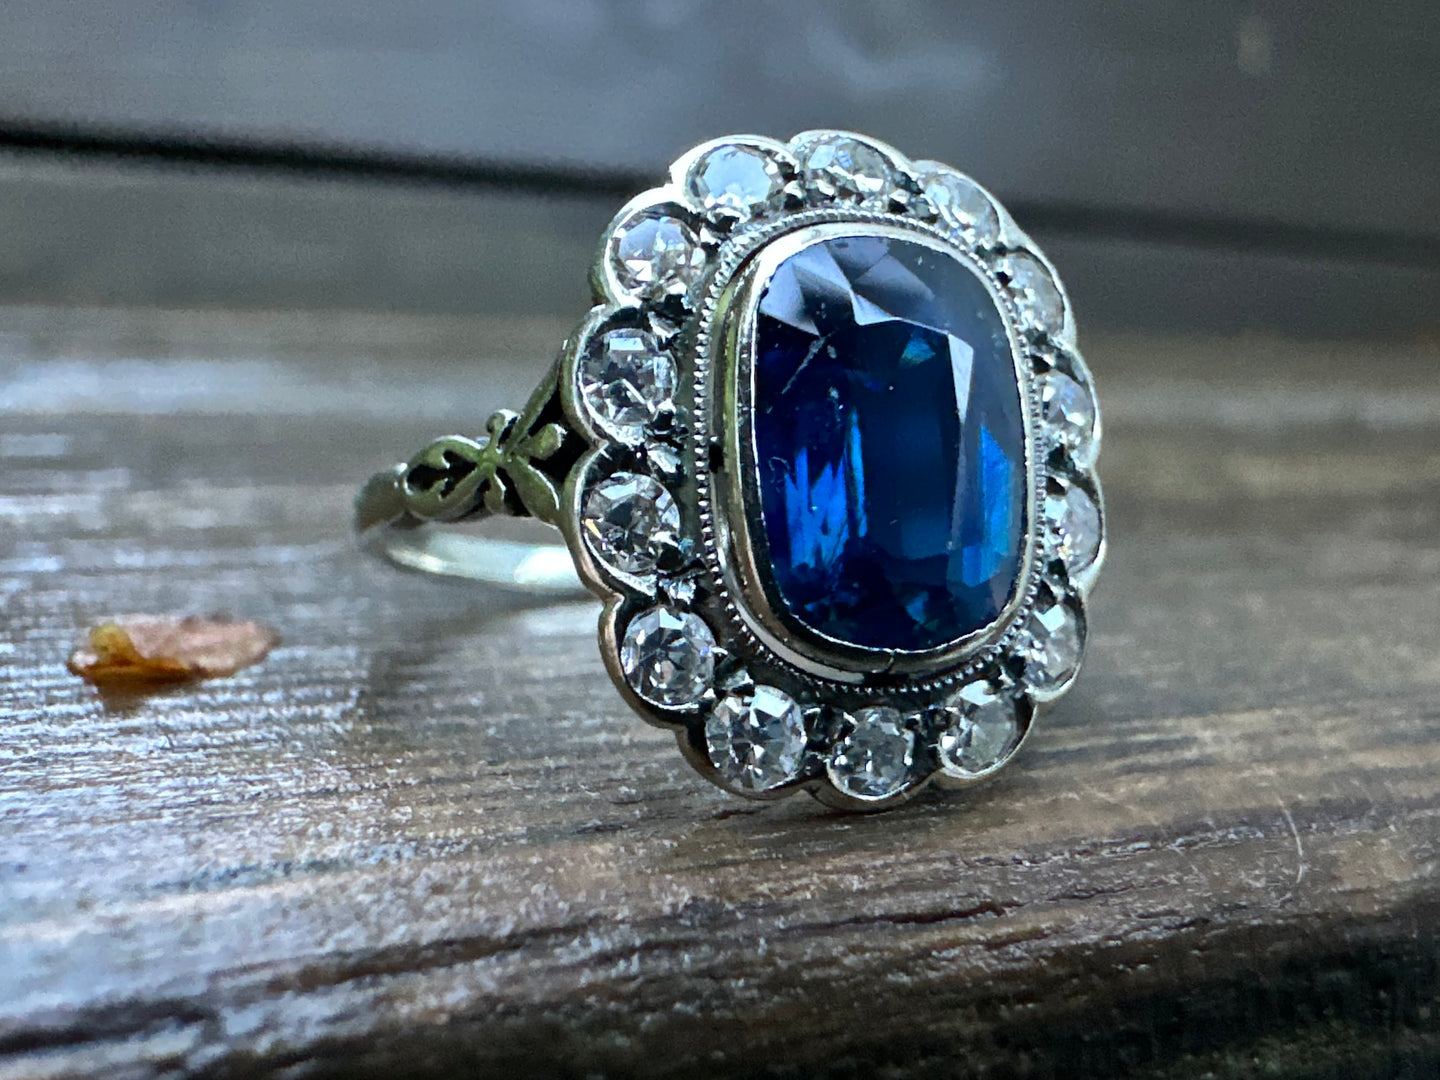 EARLY ART DECO SAPPHIRE AND DIAMOND RING IN 18KT WHITE GOLD